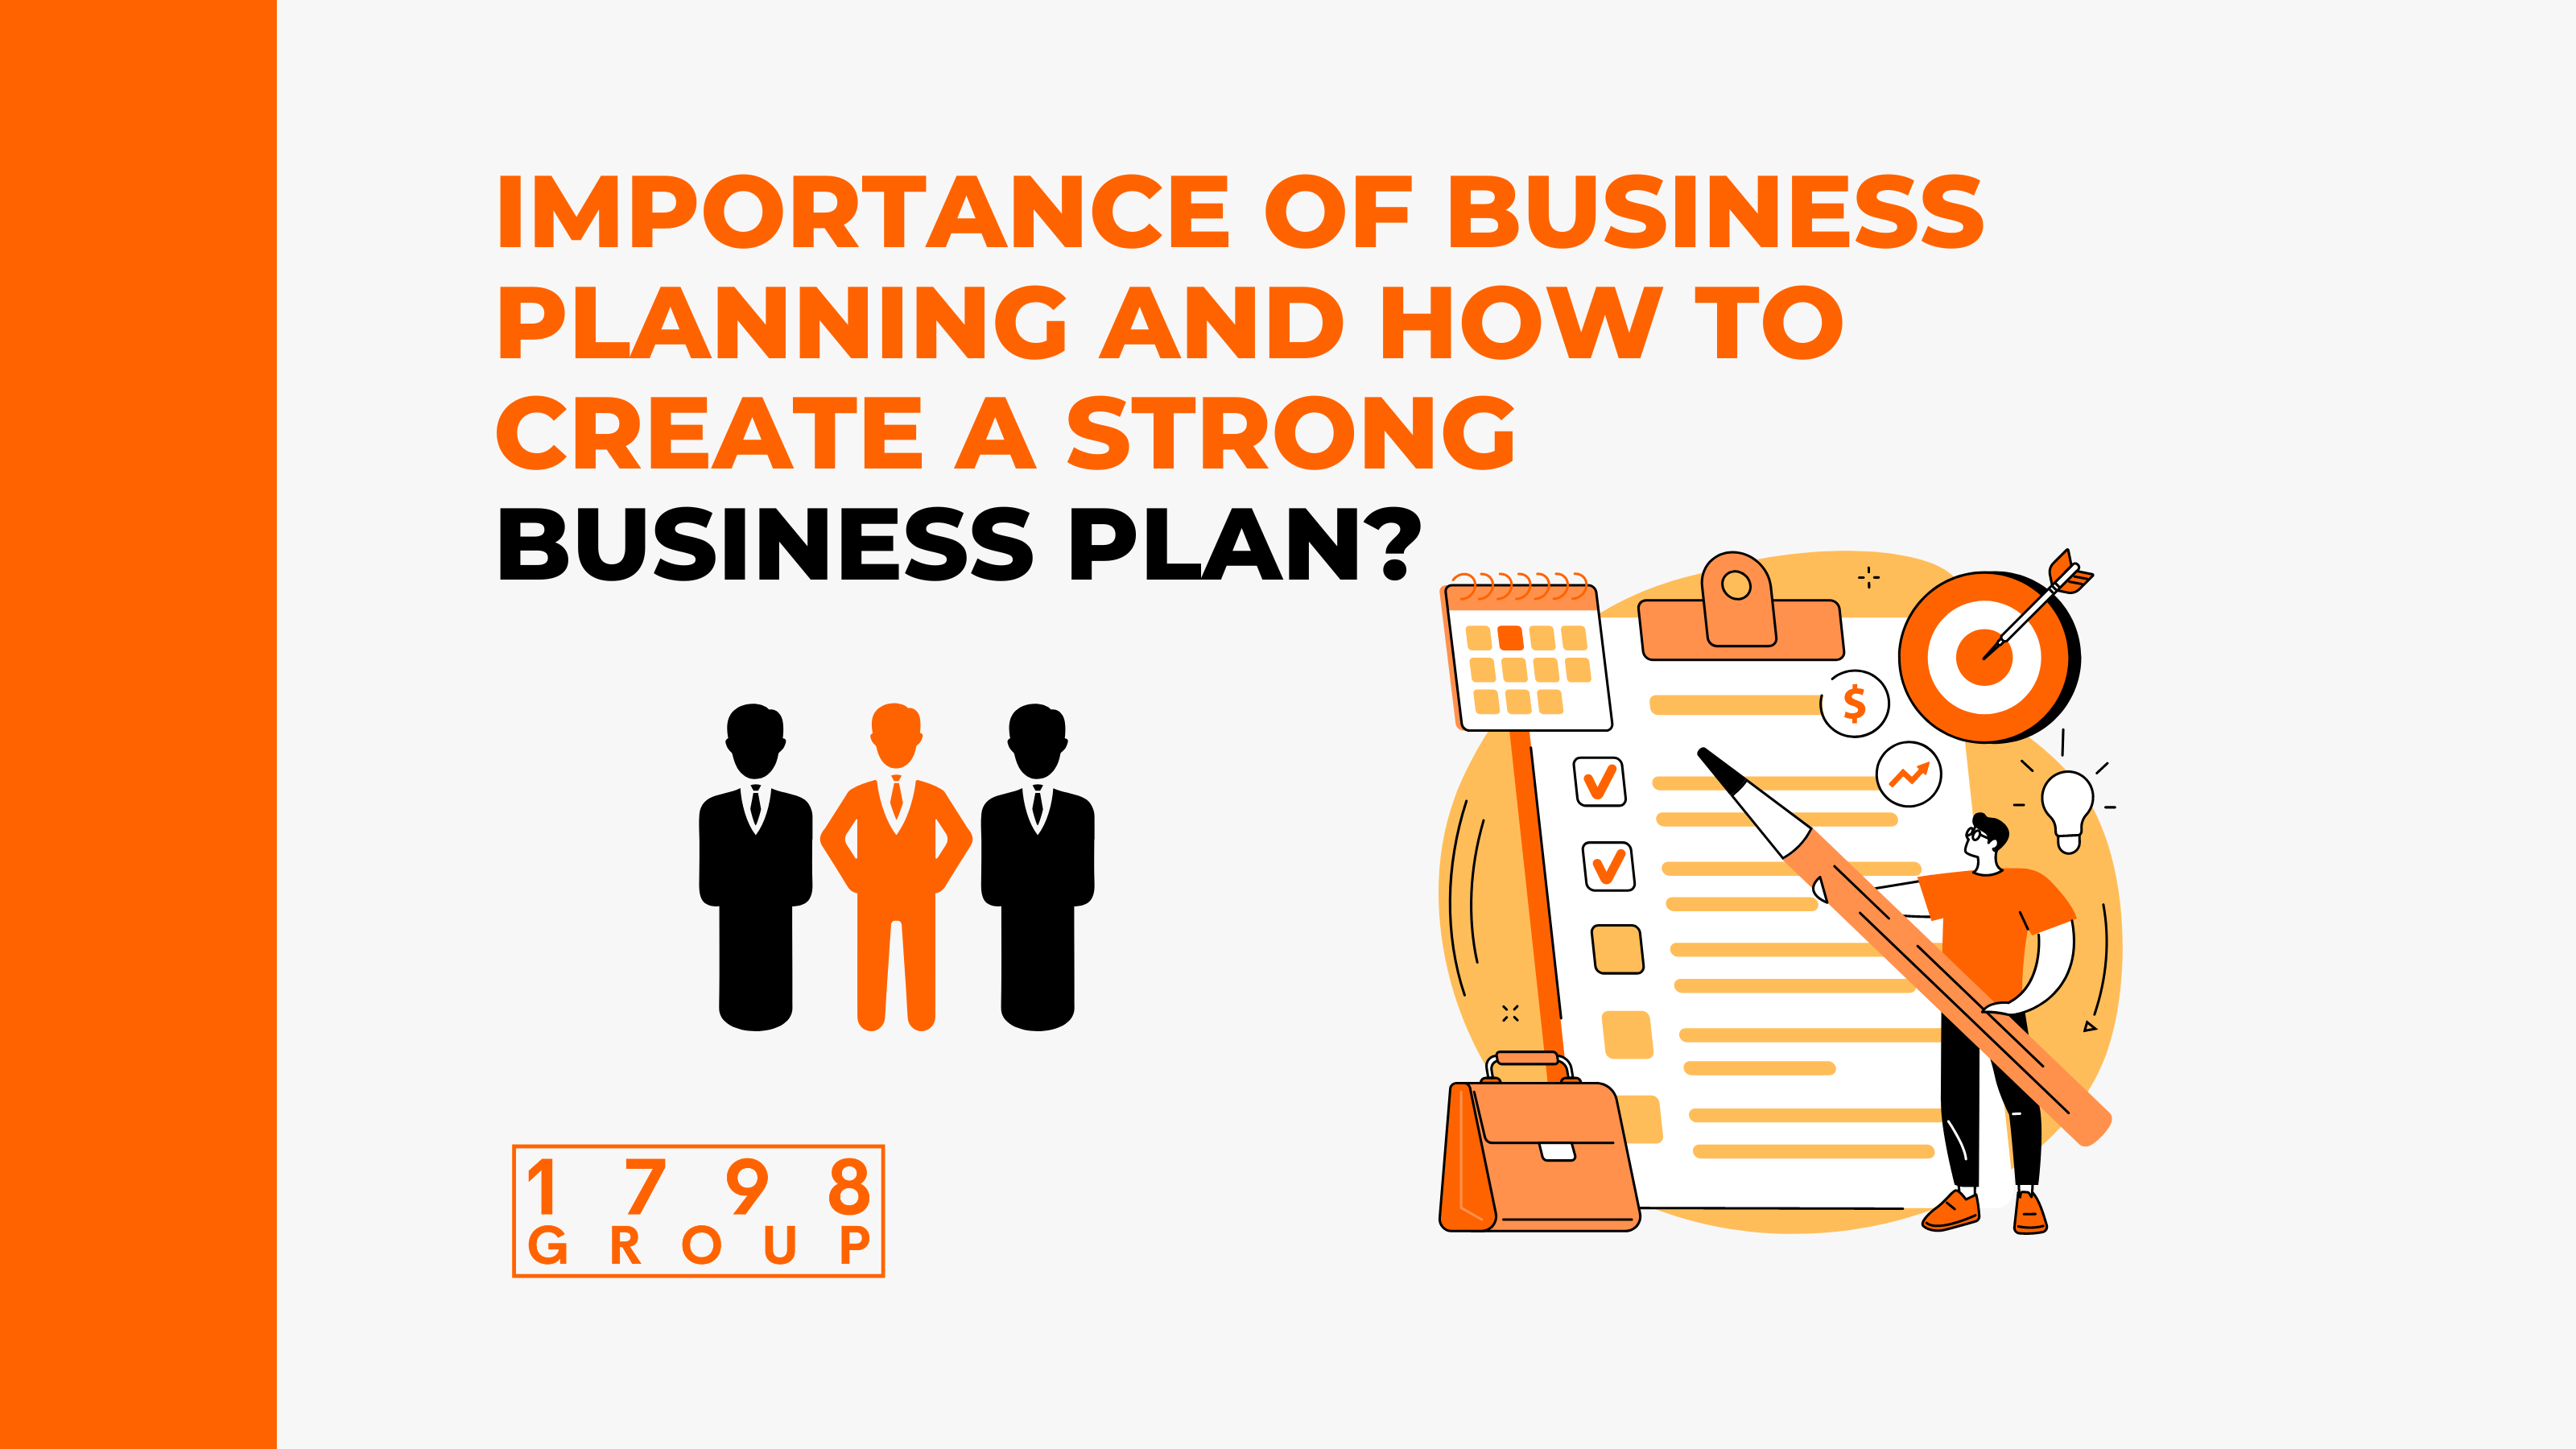 Importance of Business Planning and How to Create a Strong Business Plan